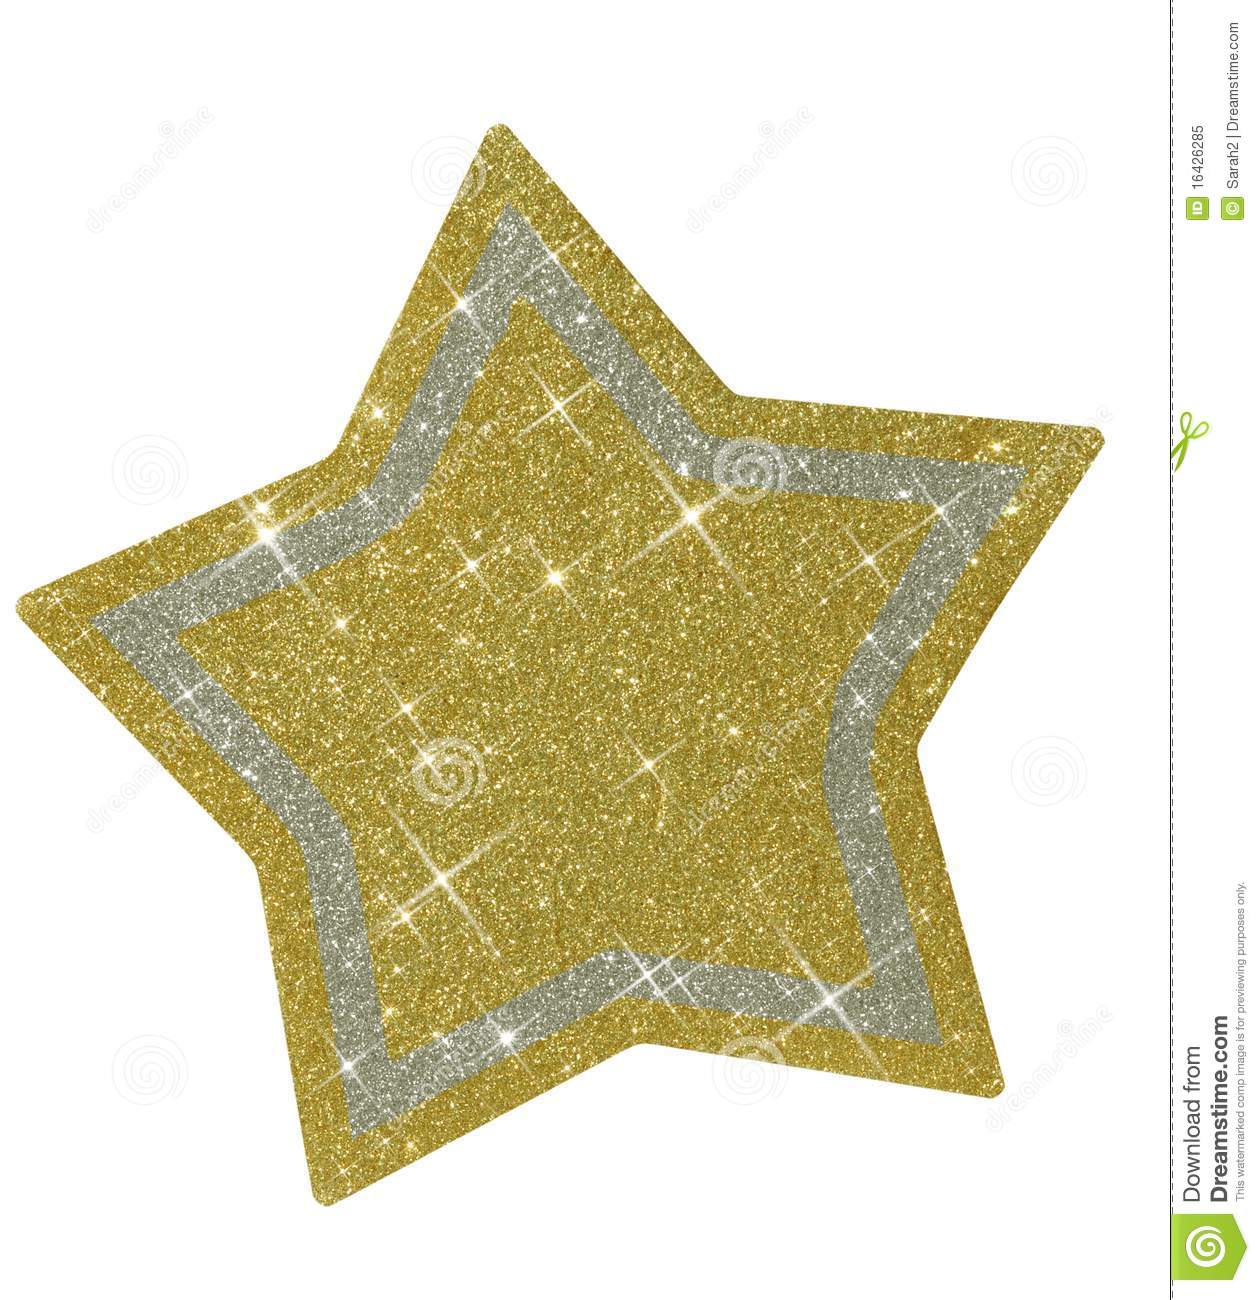 Christmas Glittery Star   Isolated Royalty Free Stock Photo   Image